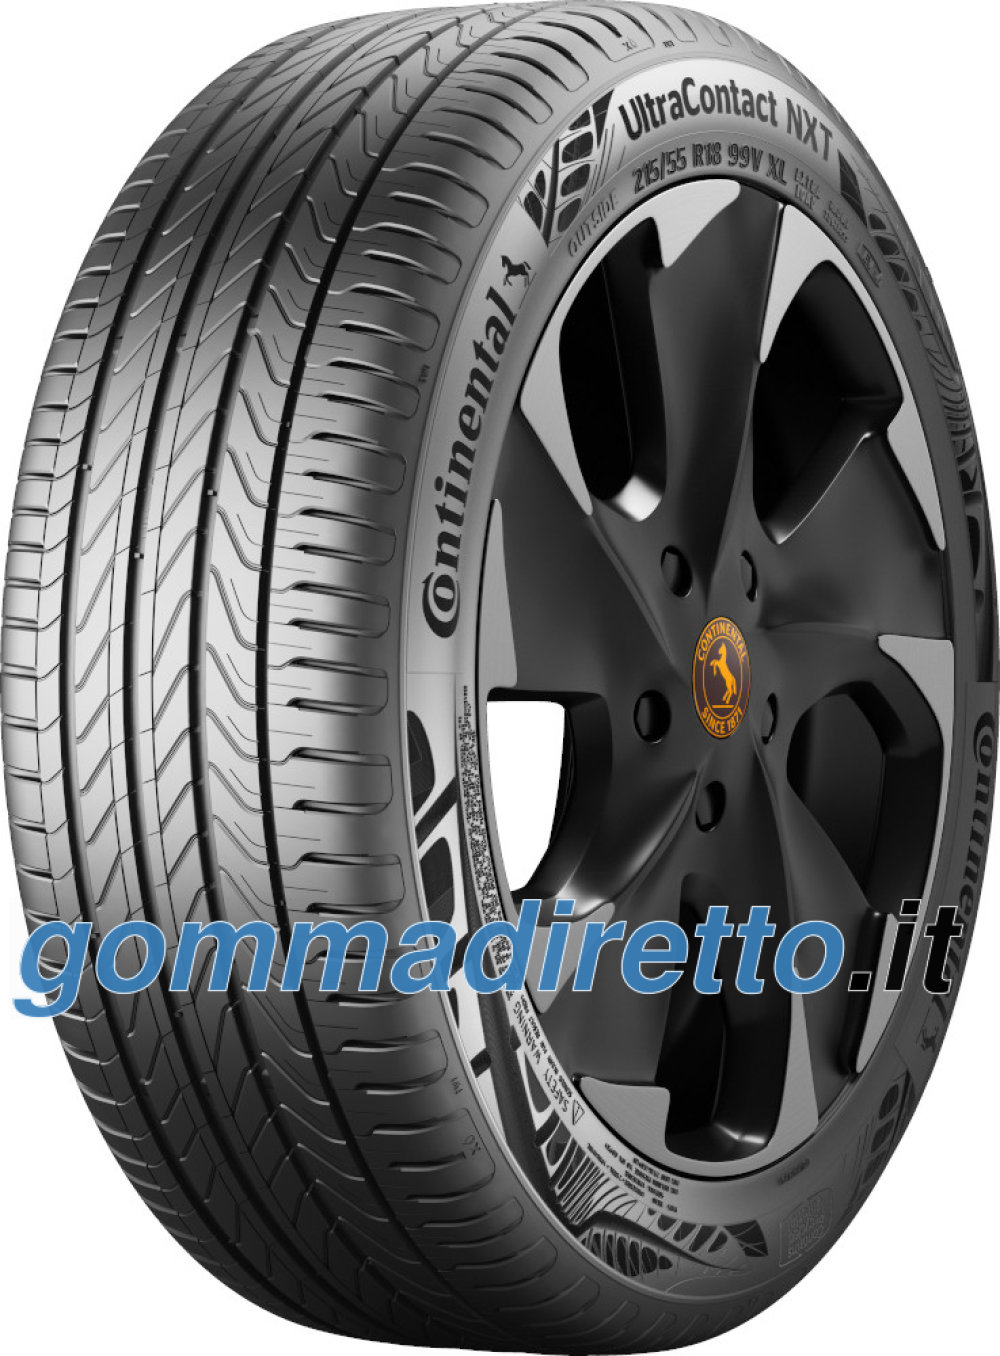 Image of Continental UltraContact NXT - ContiRe.Tex ( 235/45 R18 98Y XL CRM, EVc )